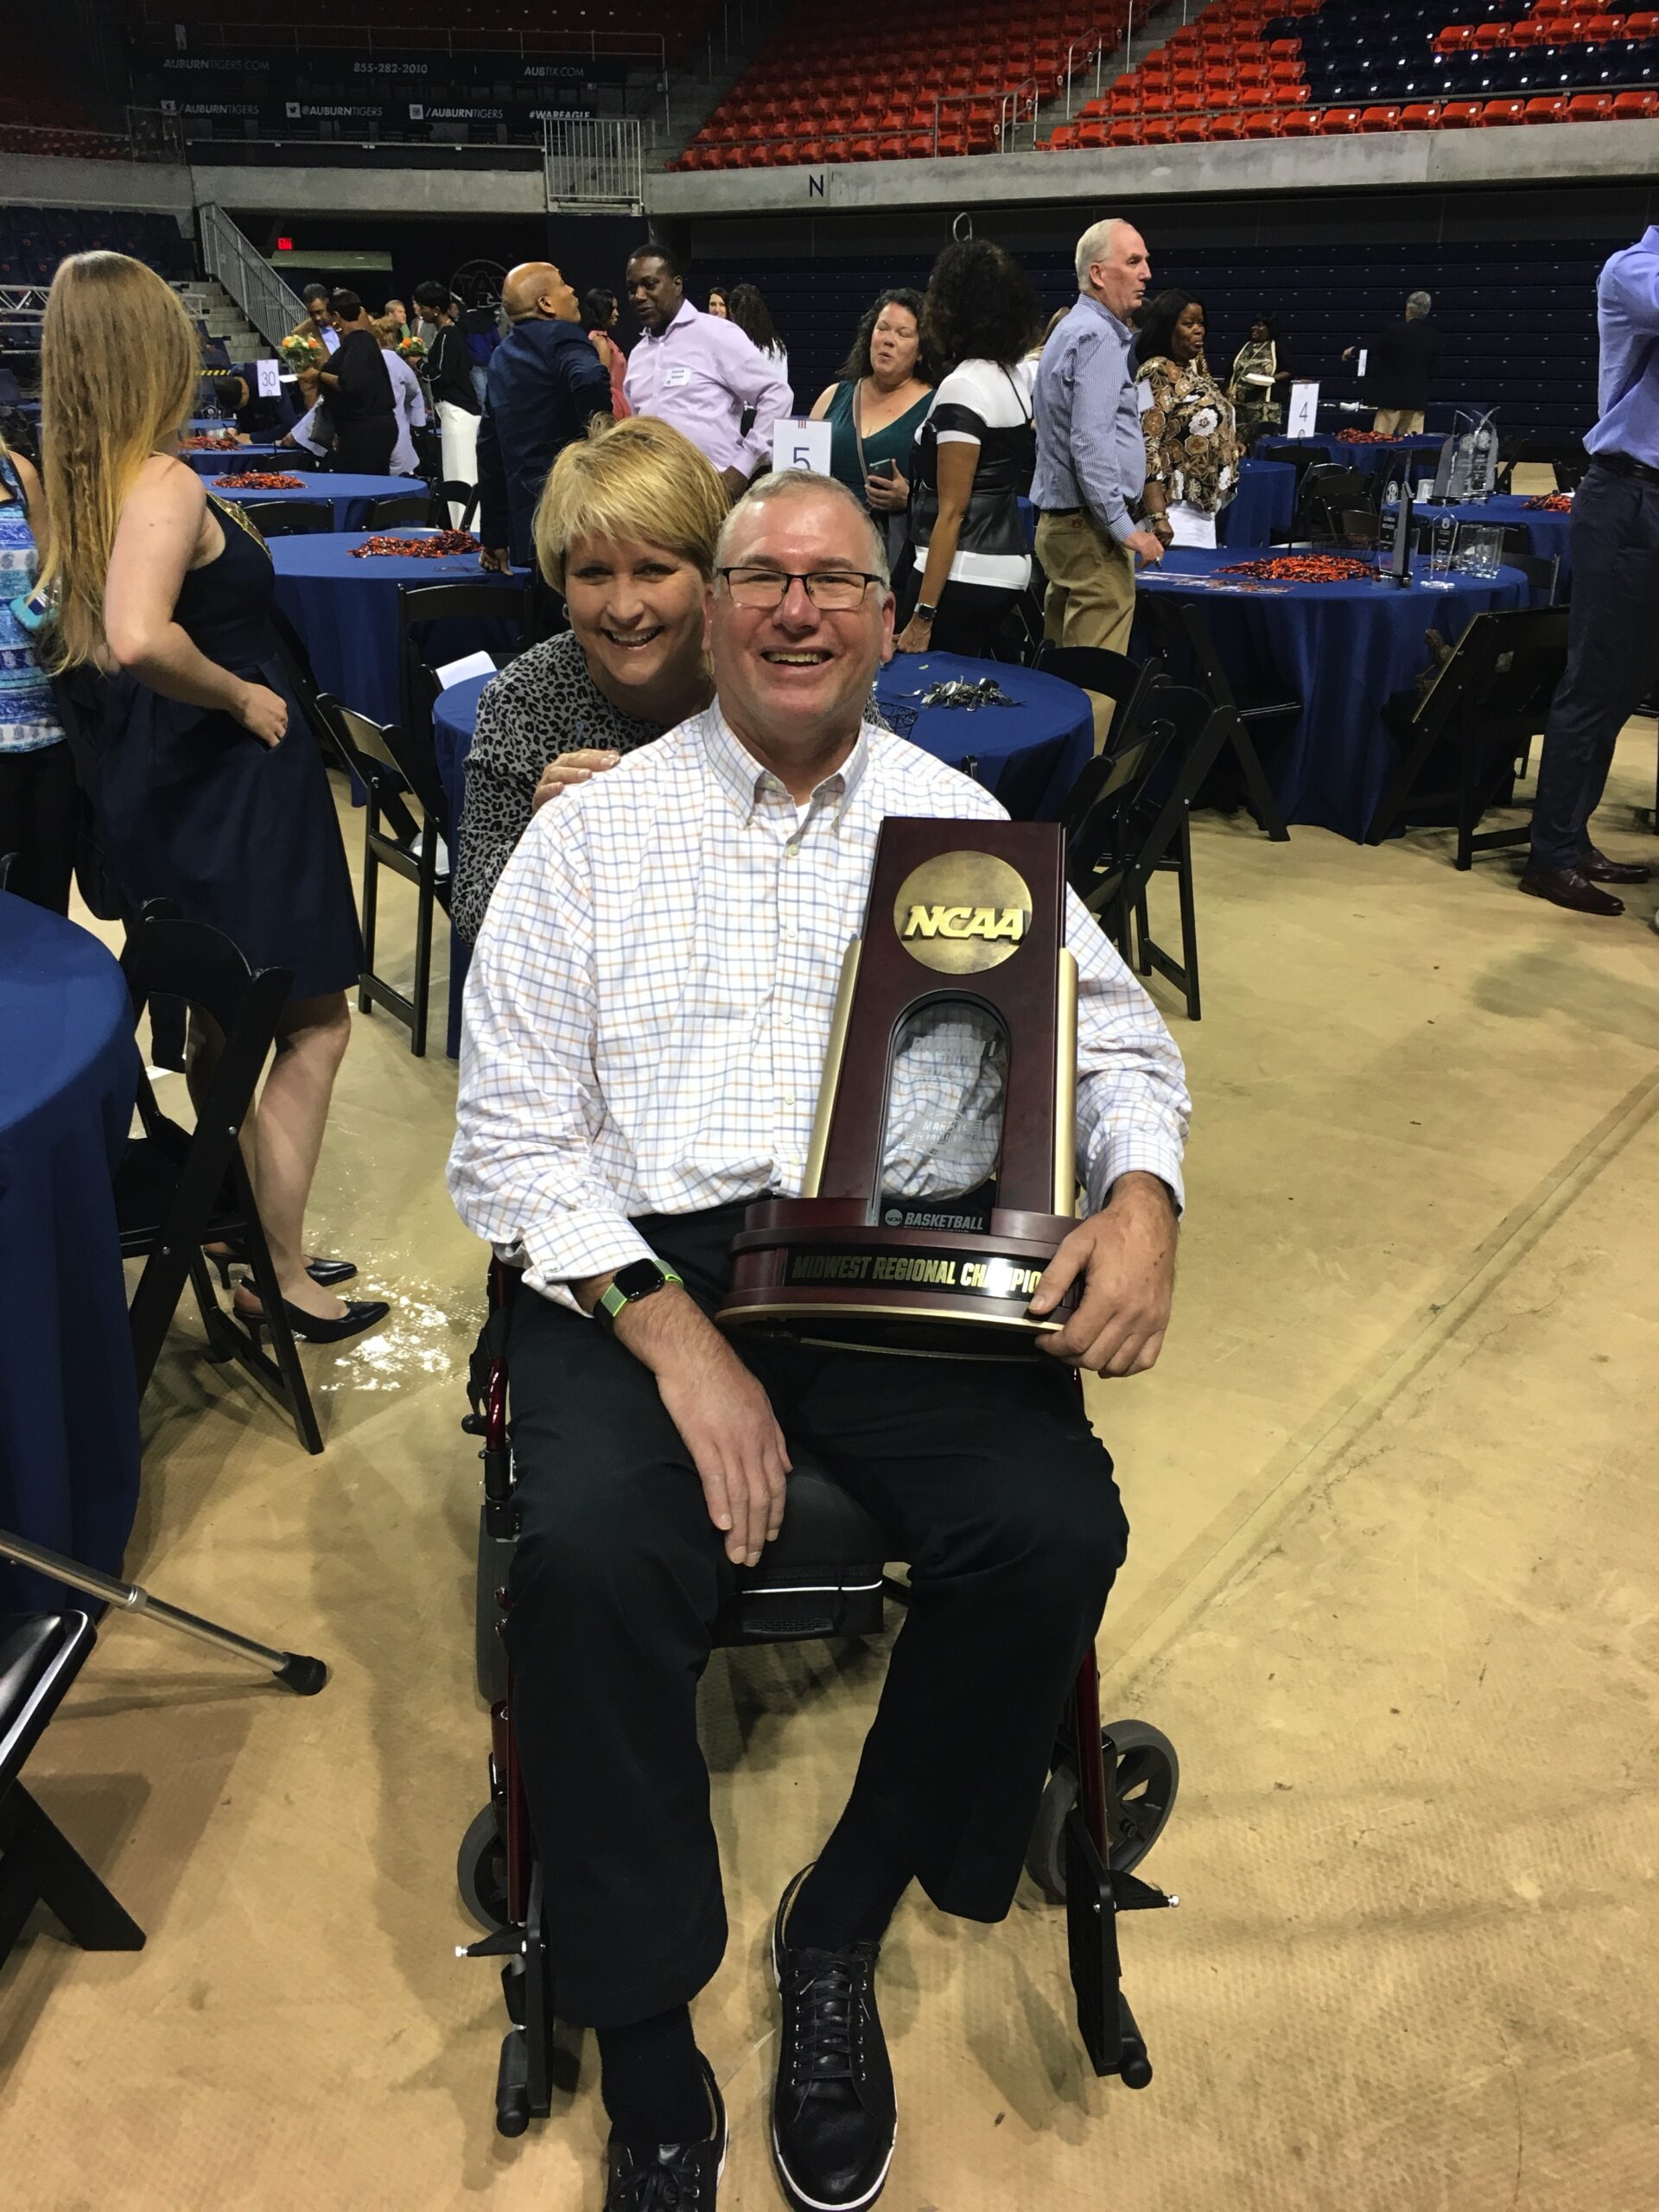 Carol and Gary Godfrey with NCAA midwest regional championship trophy